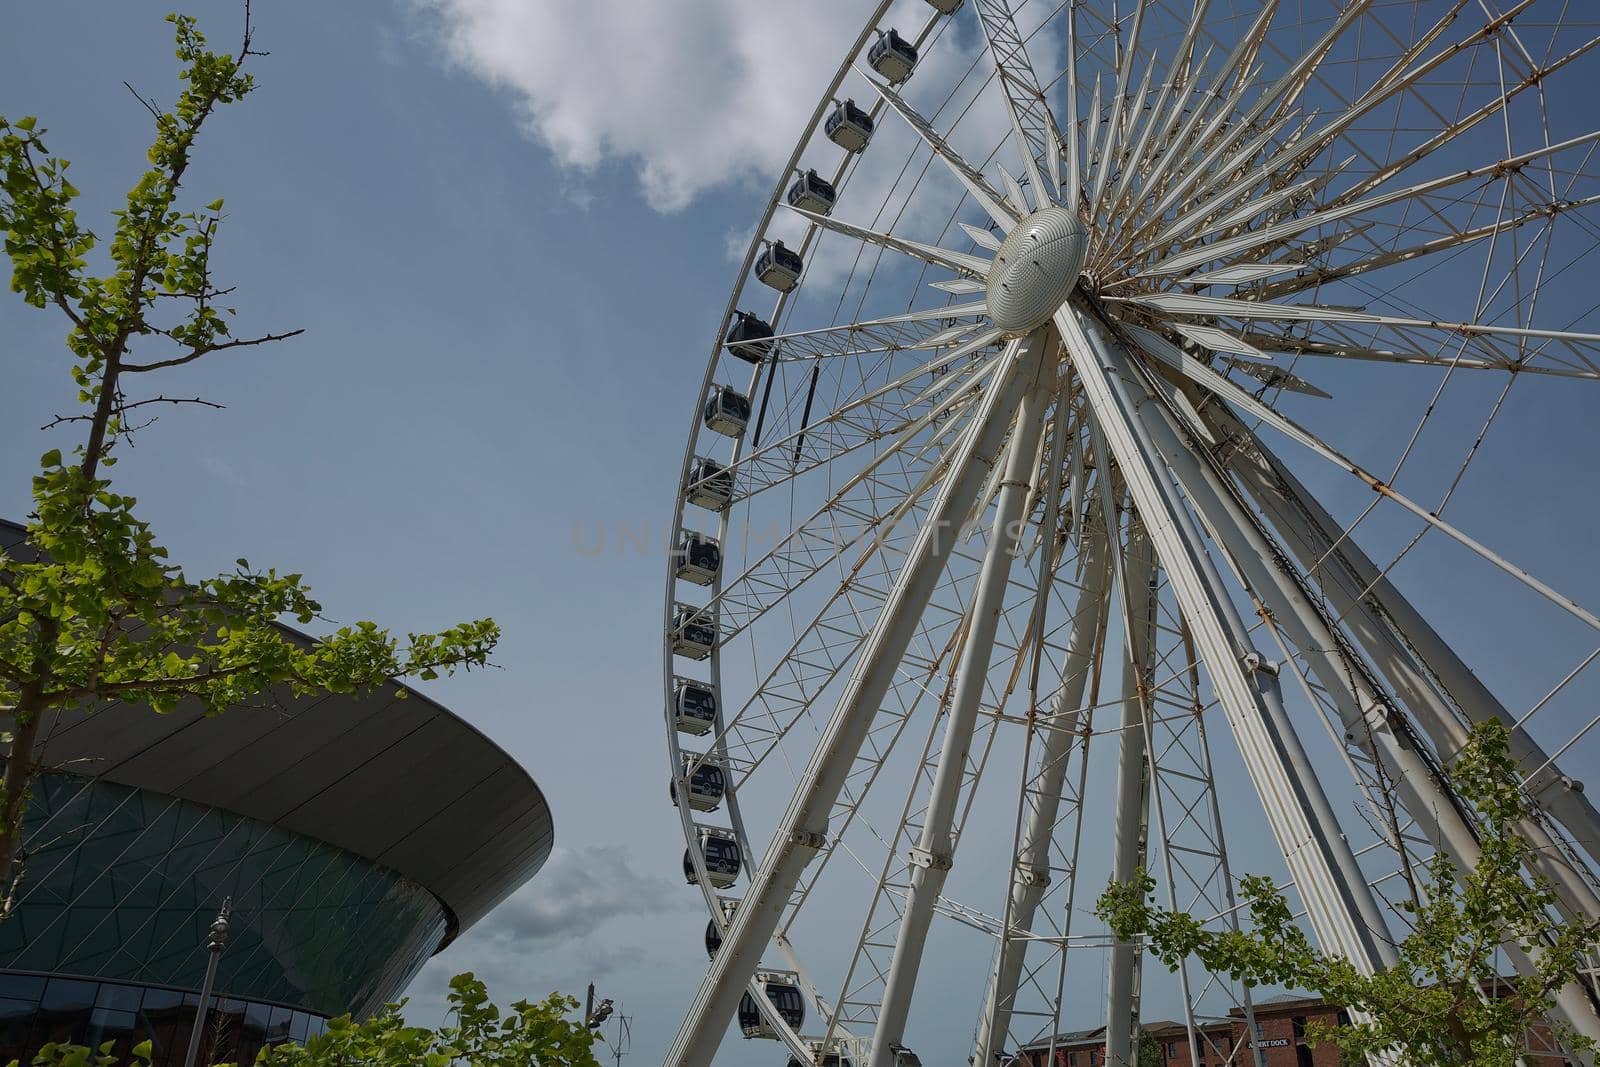 View of the ECHO convention center and an adjacent ferris wheel in Liverpool, England by wondry